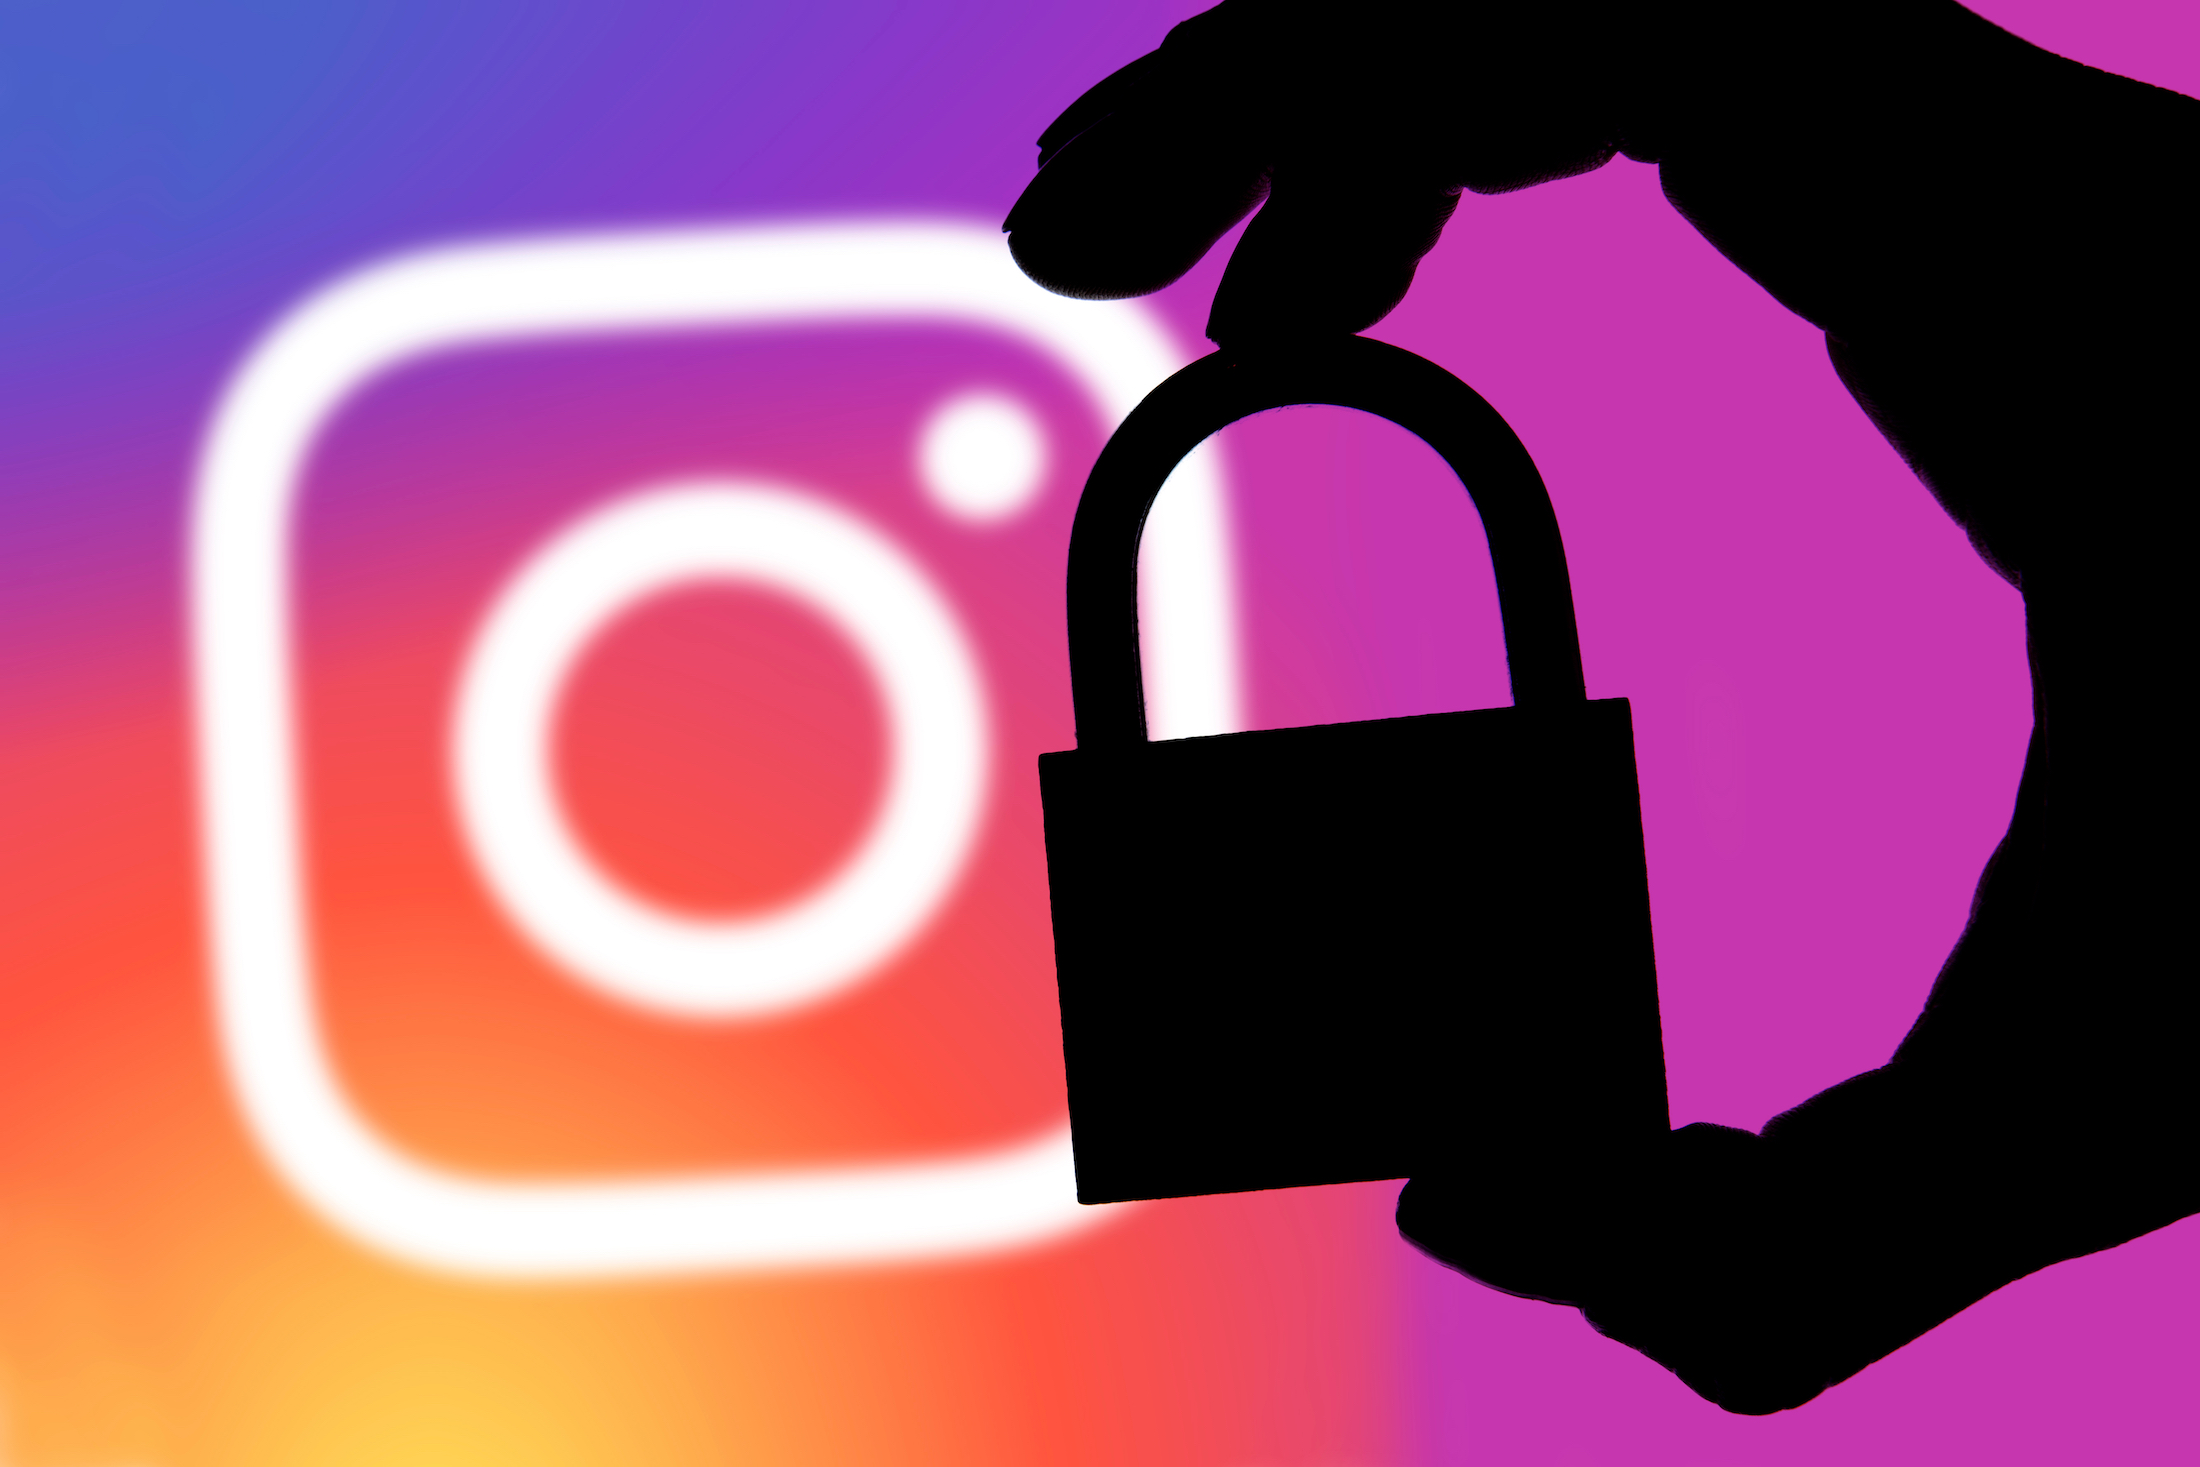 secure video solutions on Instagram